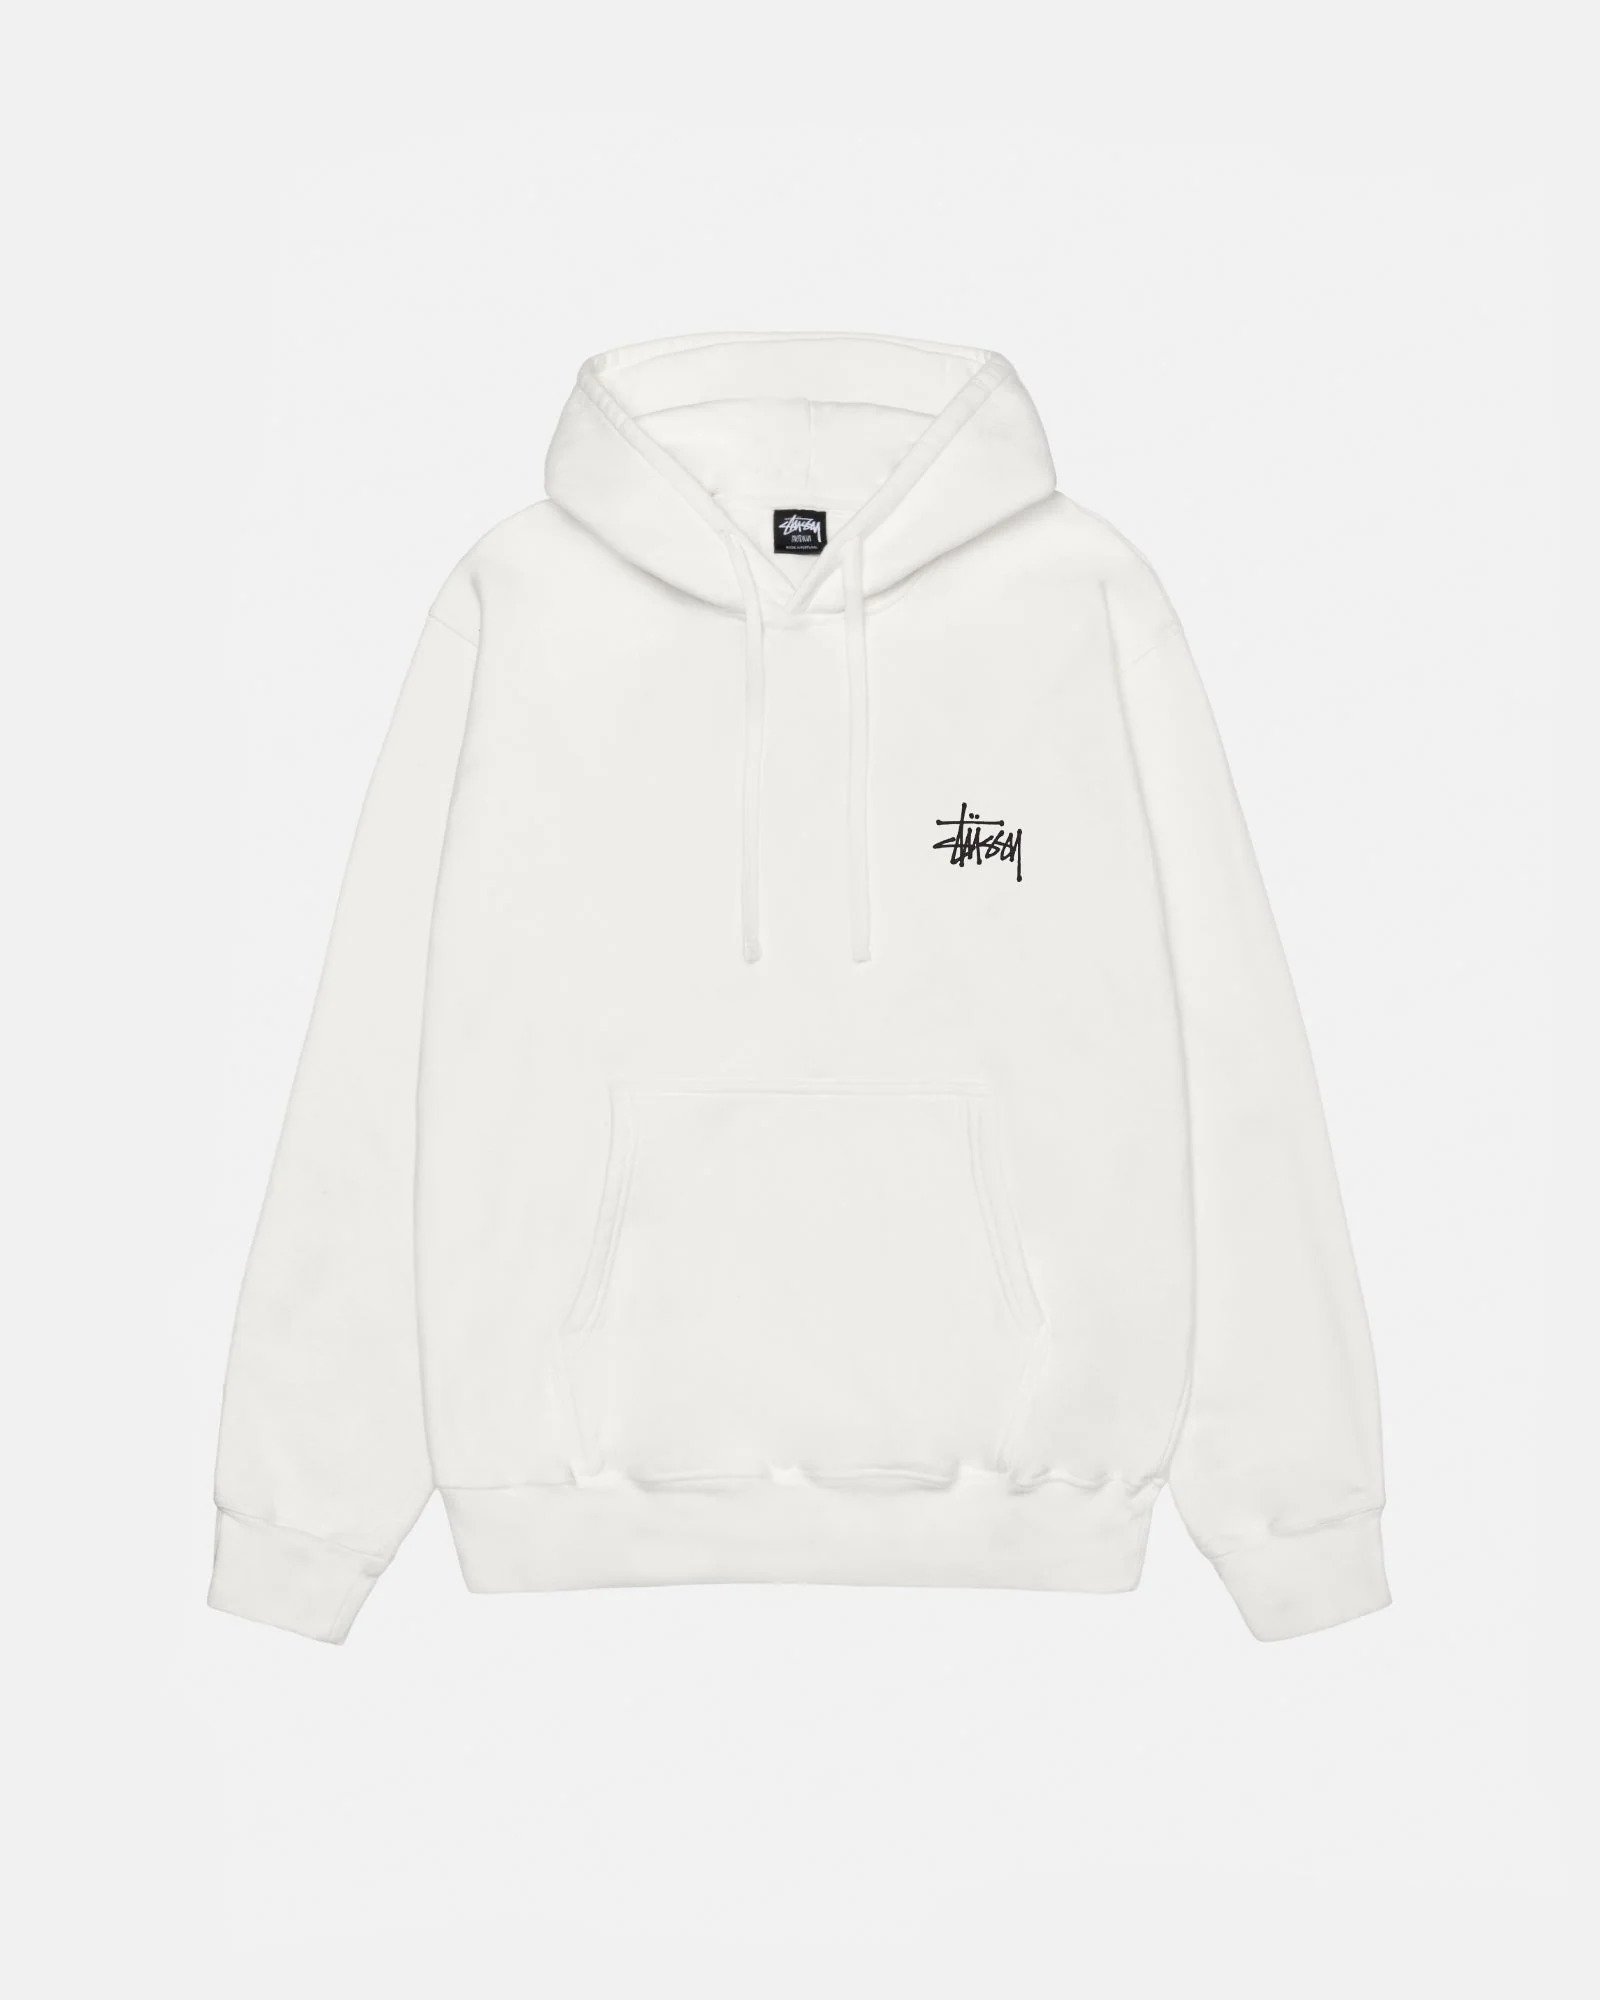 Stussy Hoodie Official Store Design and Style Variations